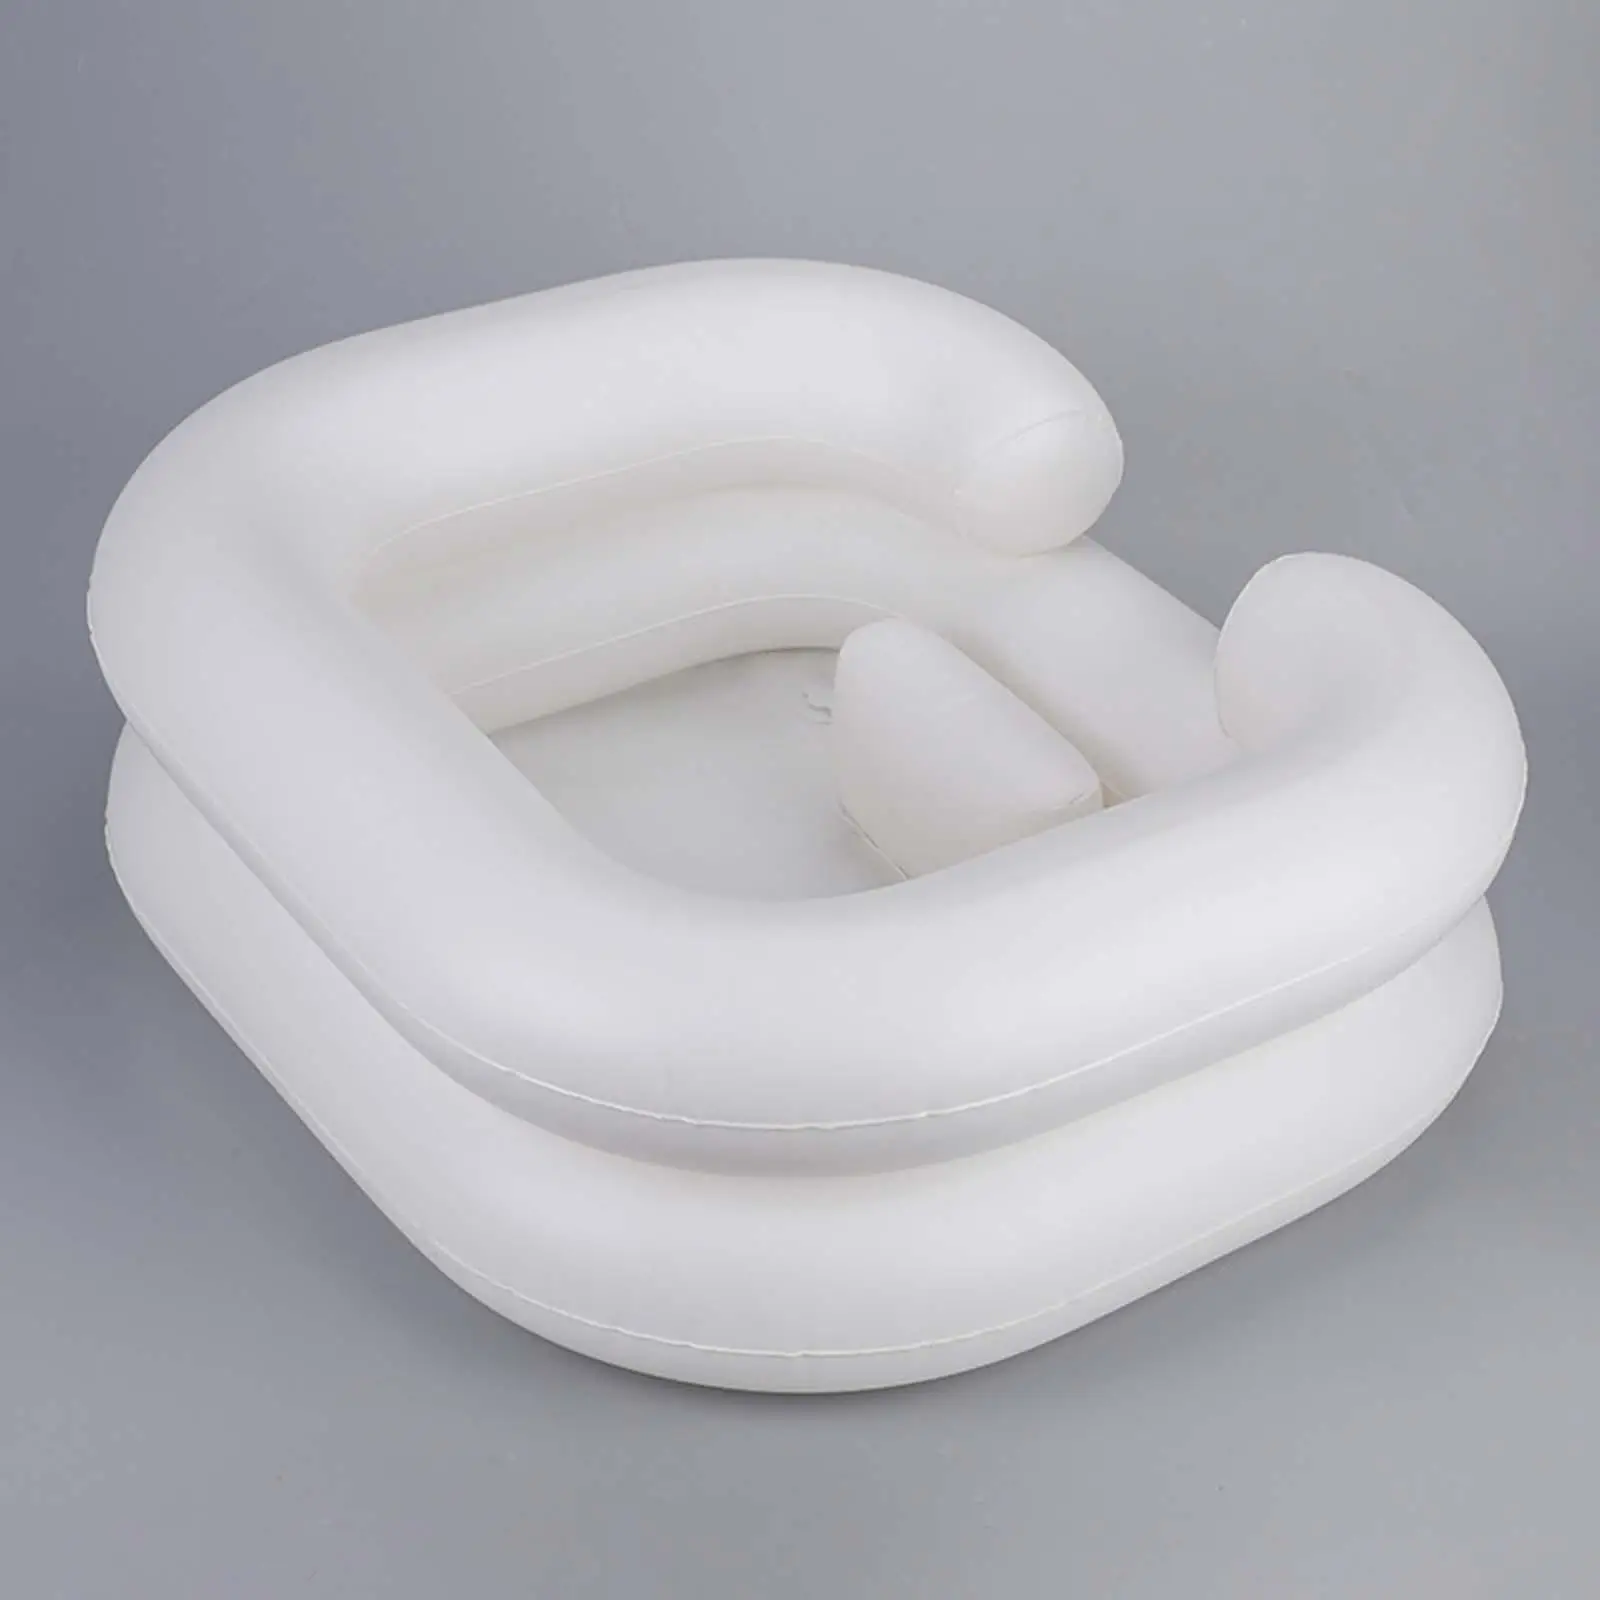 Inflatable Shampoo Basin Wash Hair in Bed Neck Support Hair Washing Tray Hair Wash Tub Inflatable Sink Hair Cuts Hair Coloring